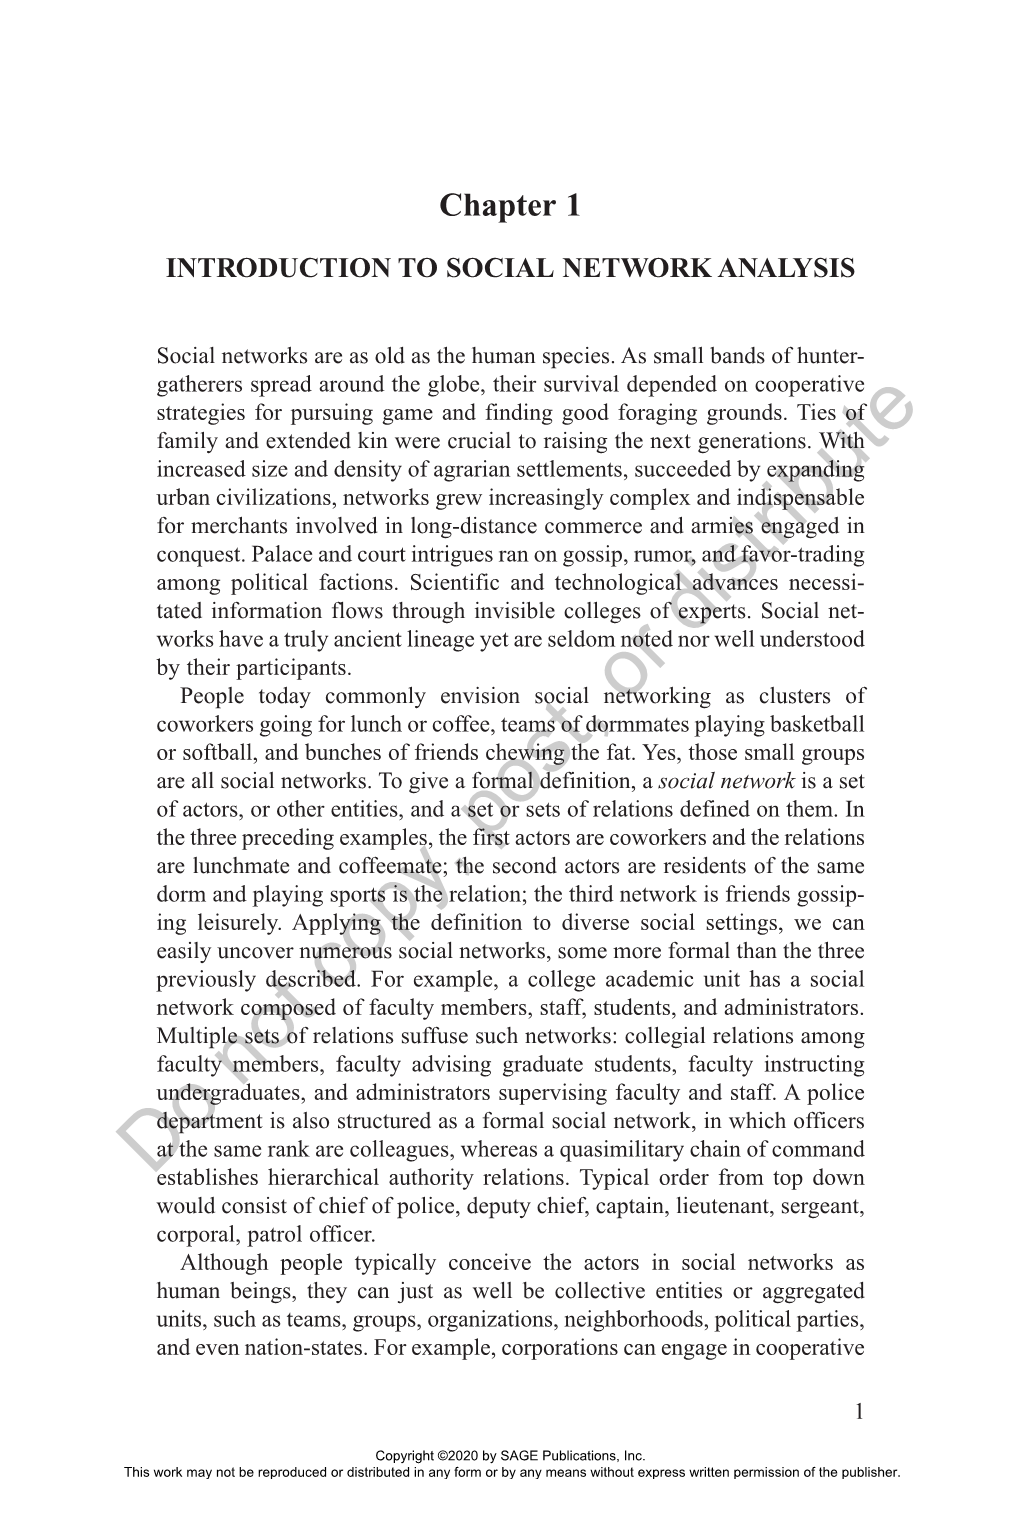 Chapter 1. Introduction to Social Network Analysis